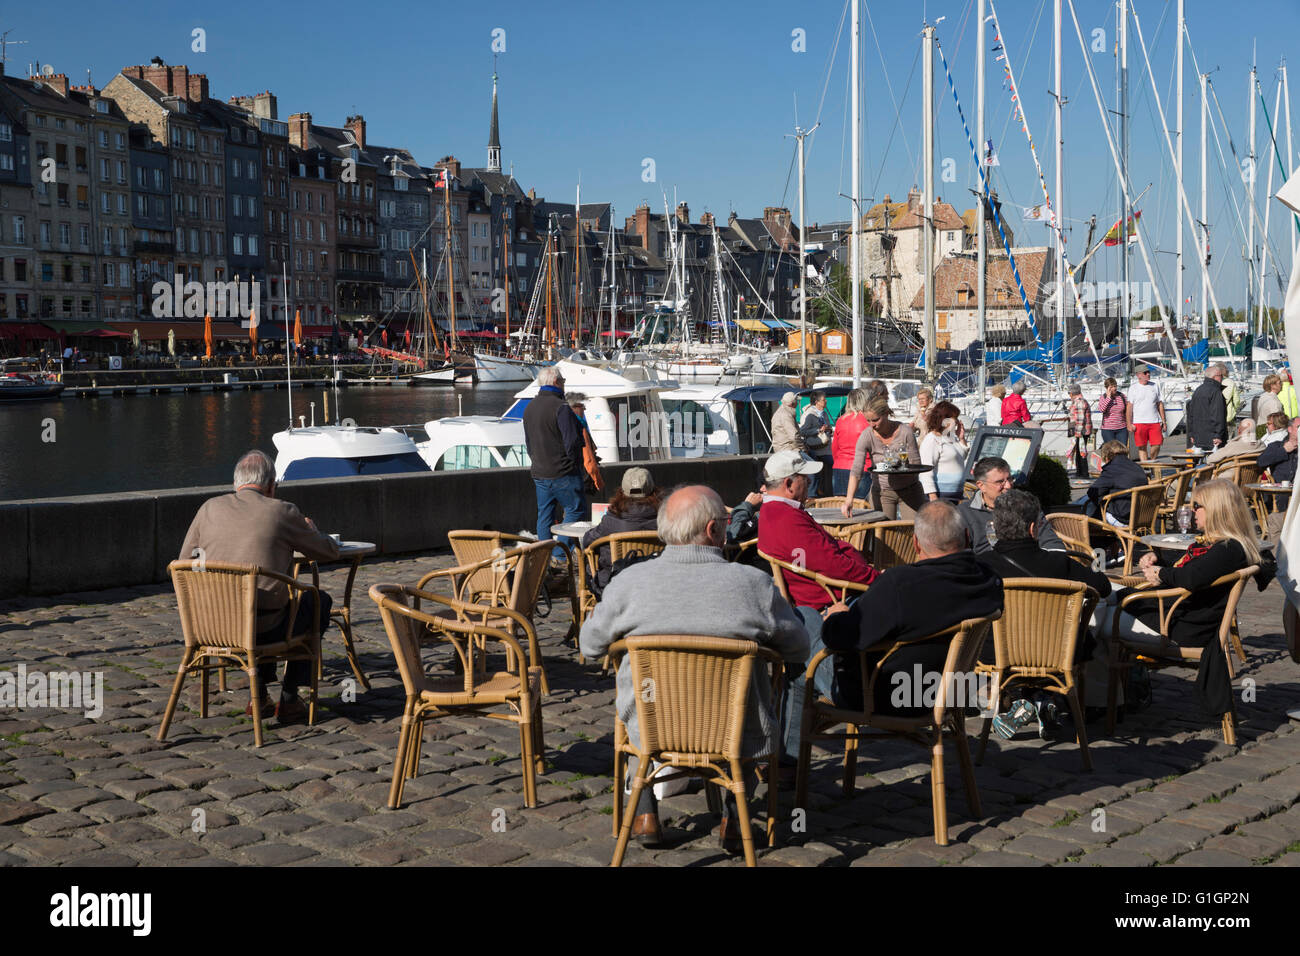 Outdoor cafe on Saint Etienne Quay in Vieux Bassin, Honfleur, Normandy, France, Europe Stock Photo